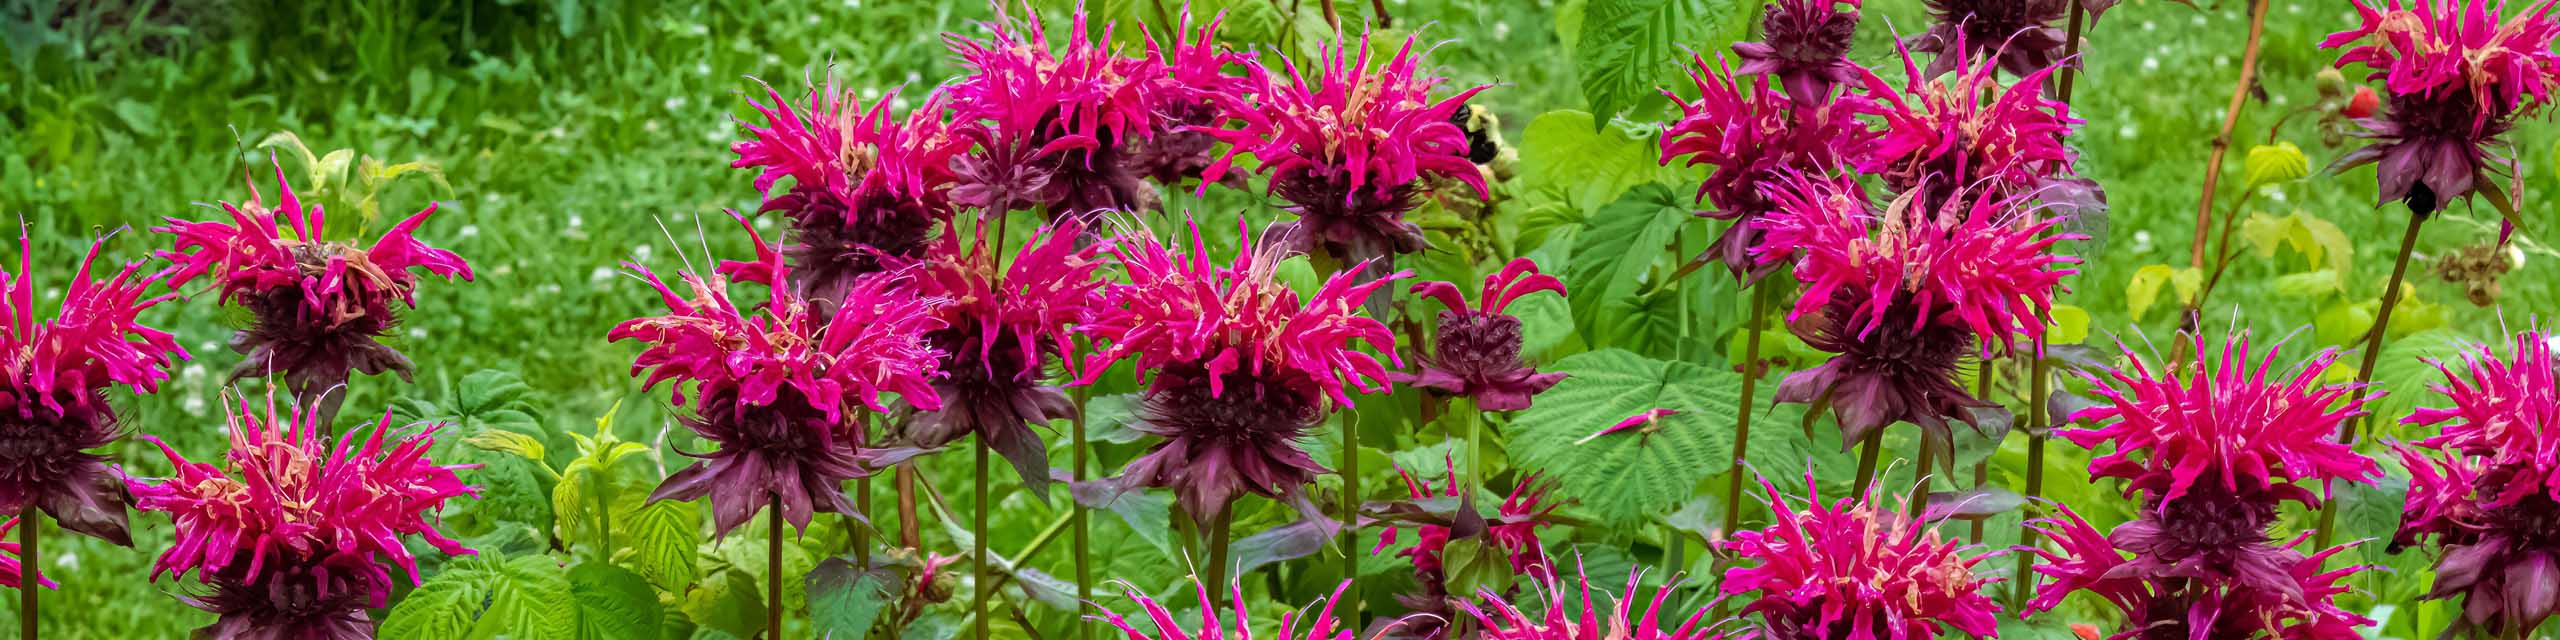 Red bergamot or bee flowers growing in a cottage garden.